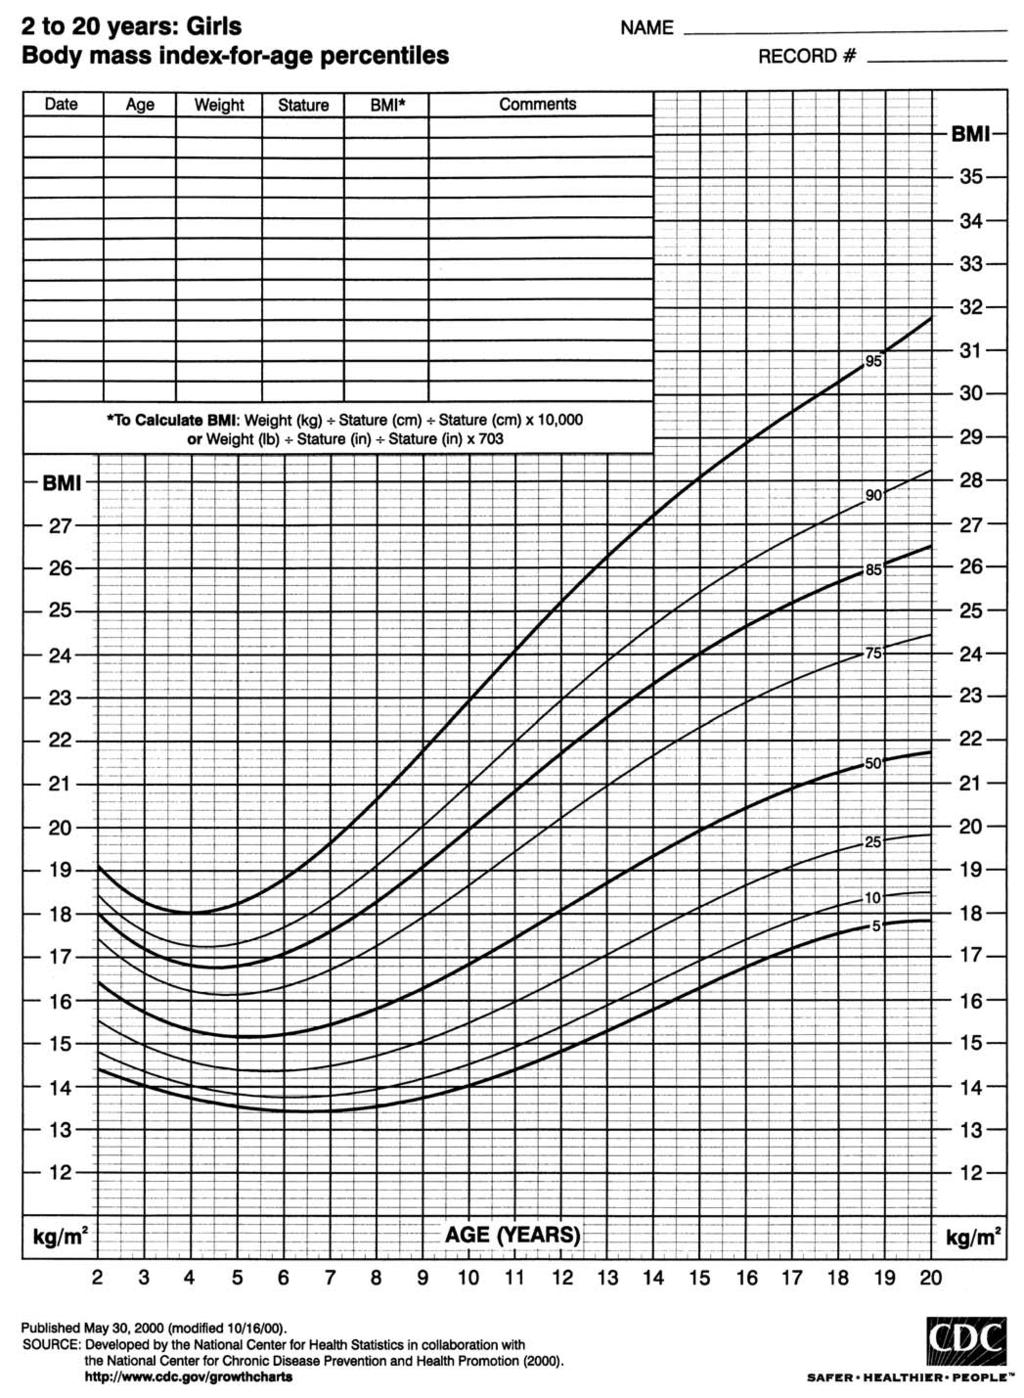 Fig. 6: Growth chart: BMI-for-age percentiles for girls aged 2 20 years.